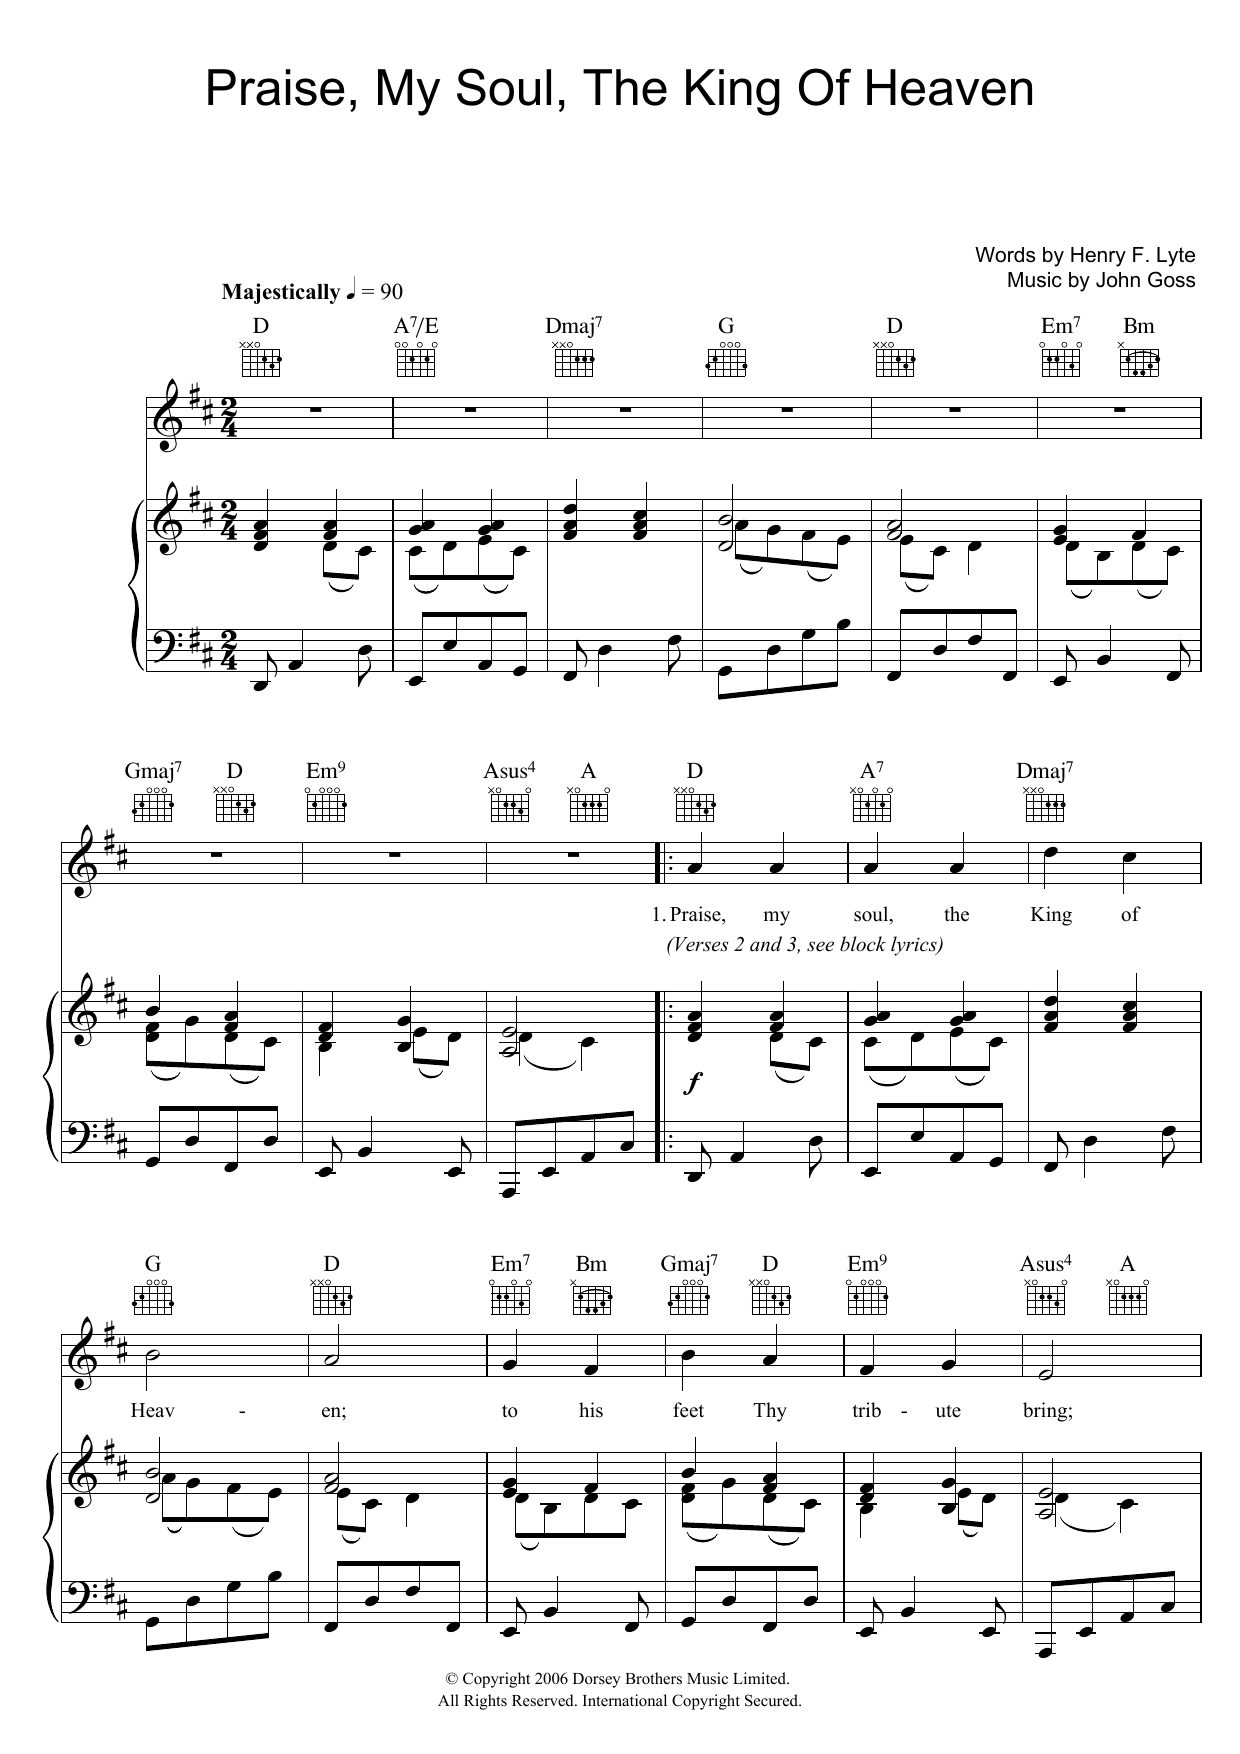 Download Traditional Praise, My Soul, The King Of Heaven Sheet Music